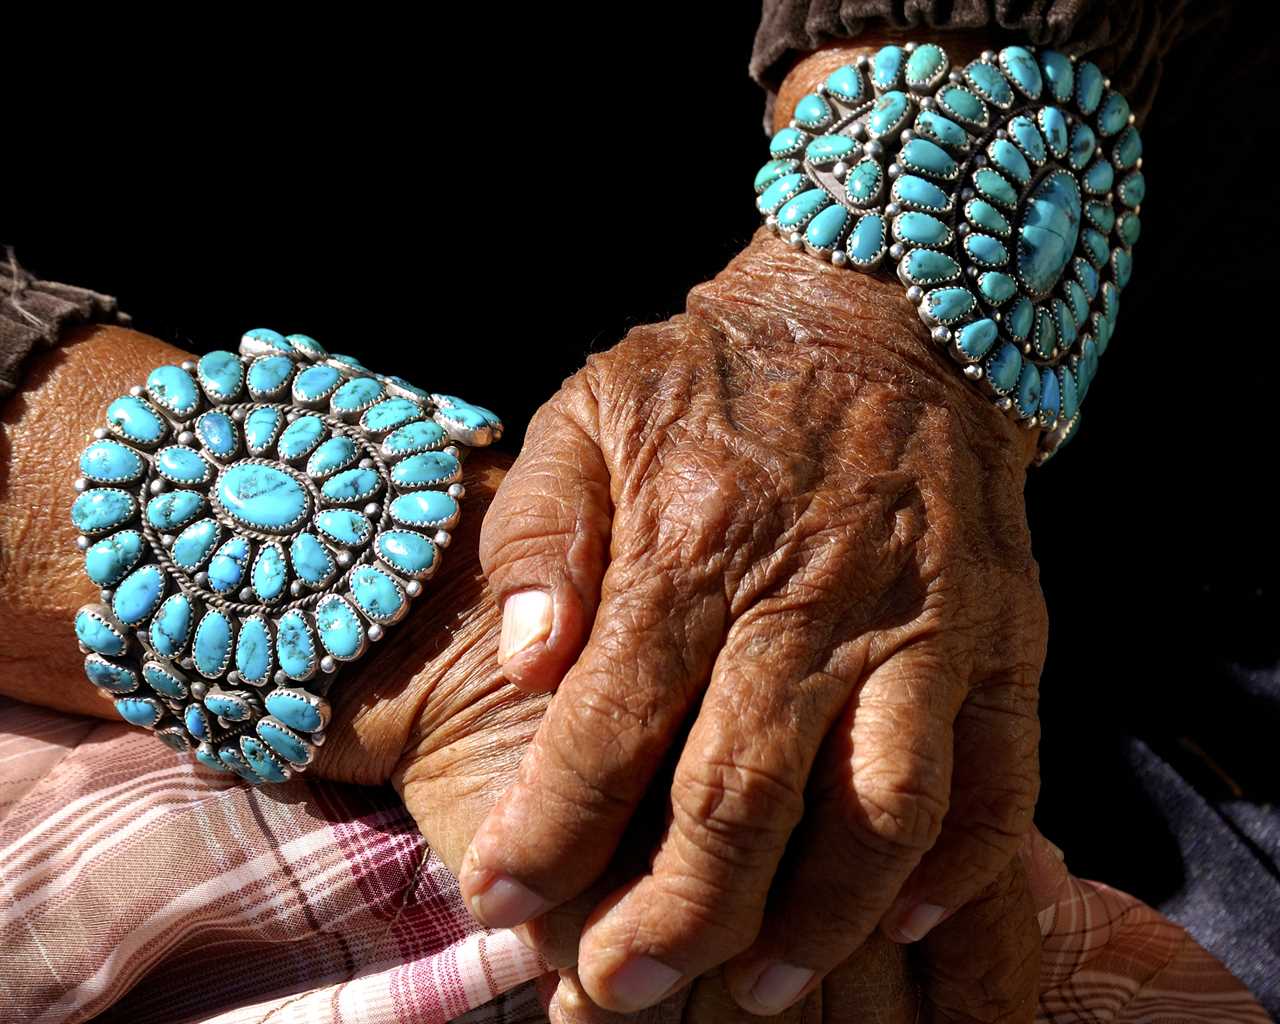 Woman with bracelets adorned with turquoise gems.